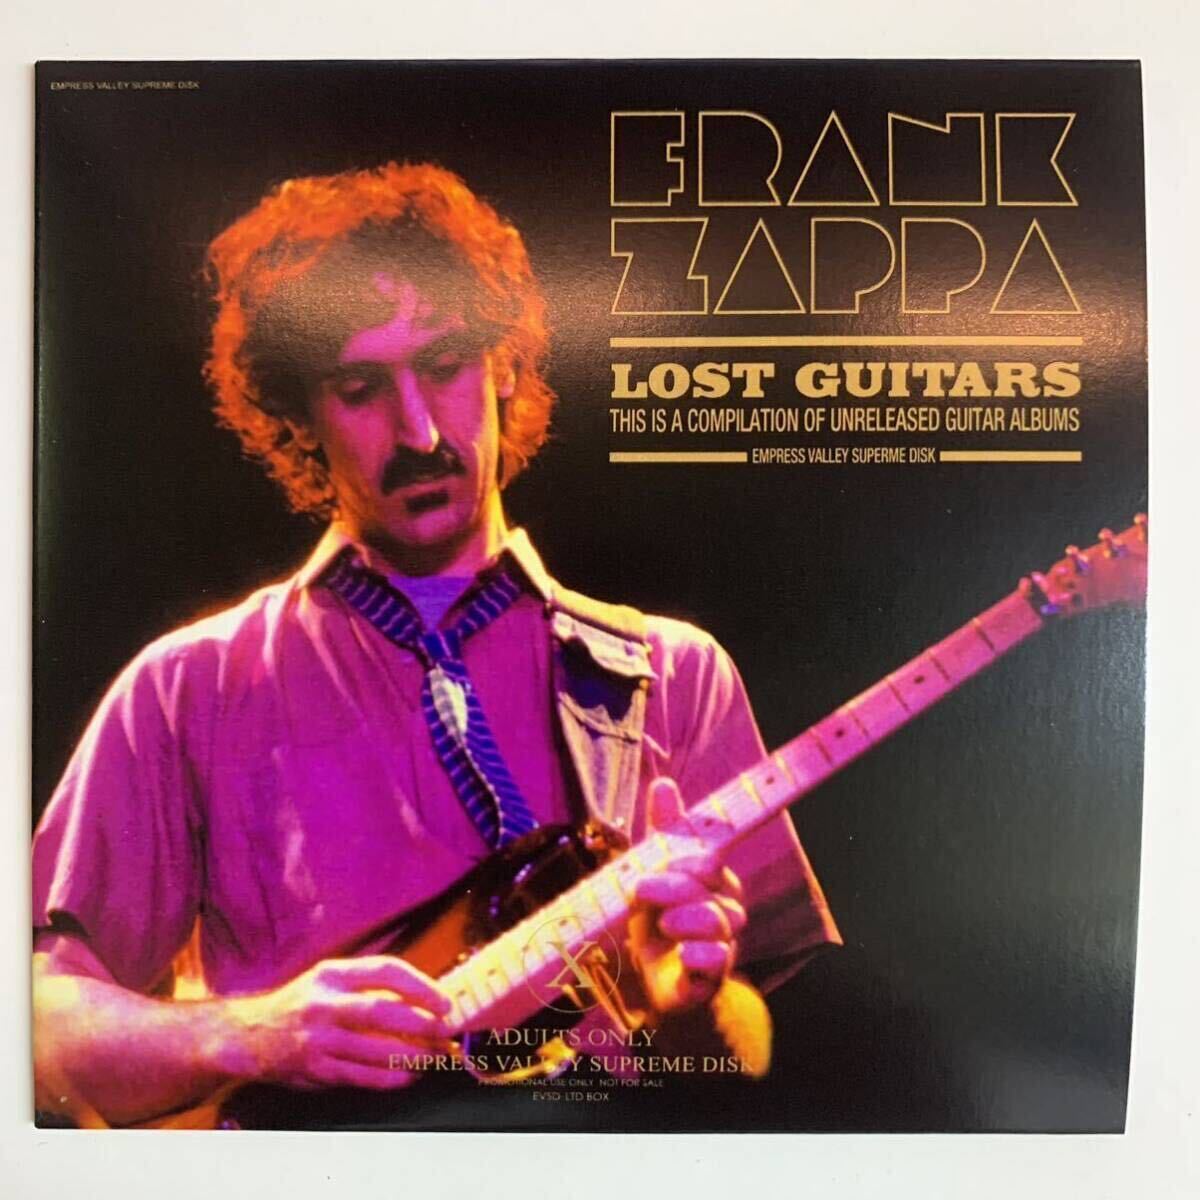 FRANK ZAPPA : THE LOST GUITARS - This is a compilation of unreleased guitar albums「失われたギター」嬉しい再入荷！最高だ！プレス盤_画像2